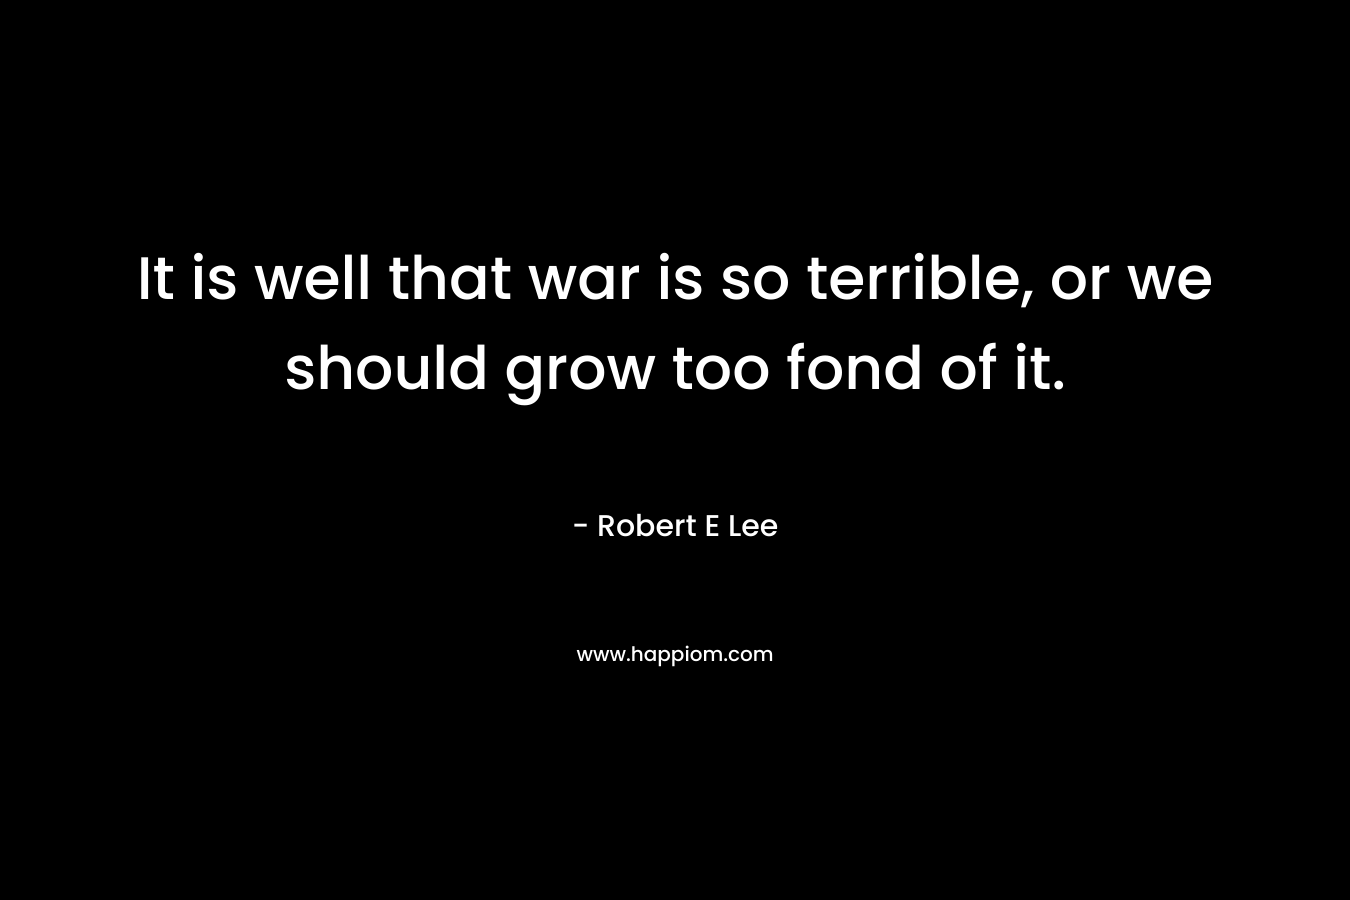 It is well that war is so terrible, or we should grow too fond of it.